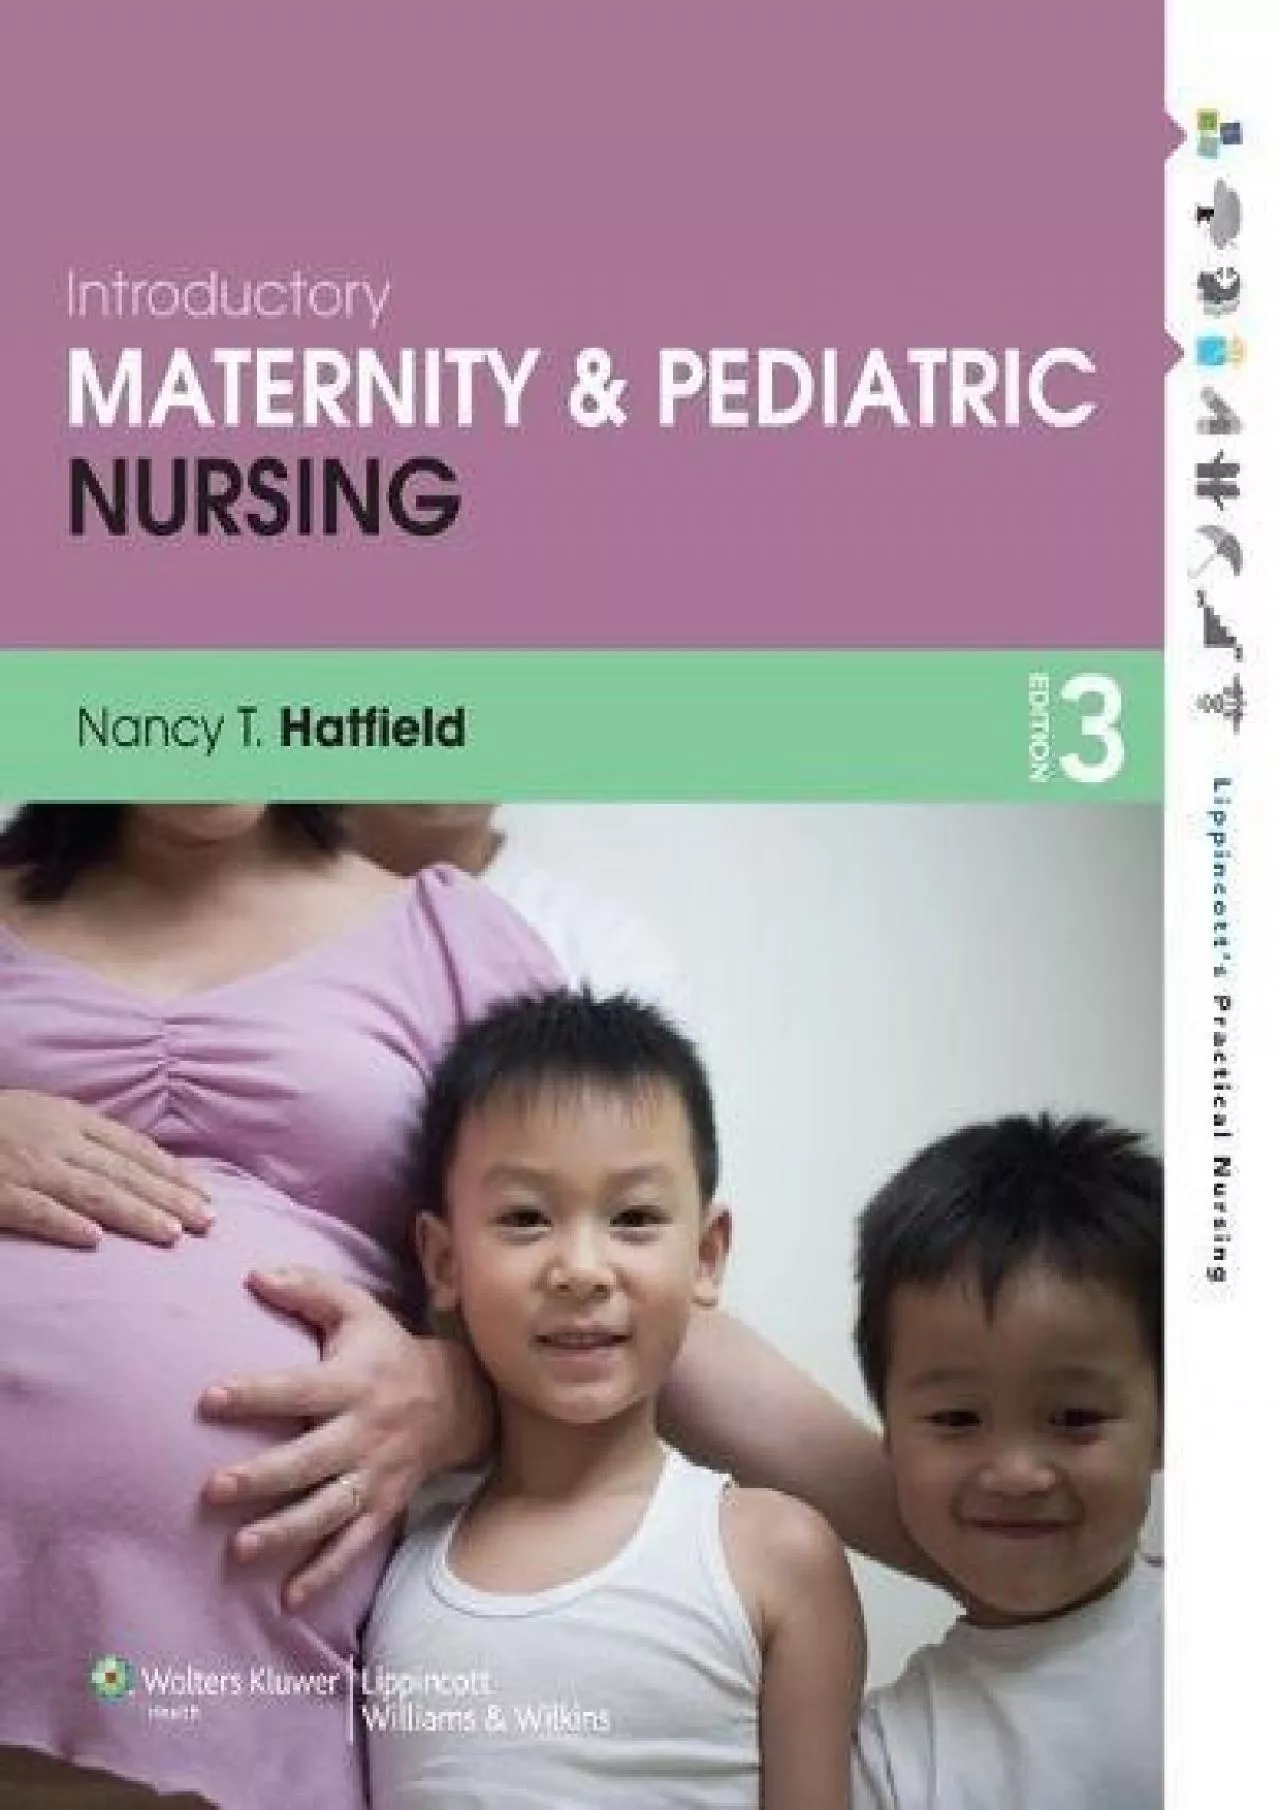 (EBOOK)-Introductory Maternity and Pediatric Nursing, 3rd Ed. + Introductory Maternity